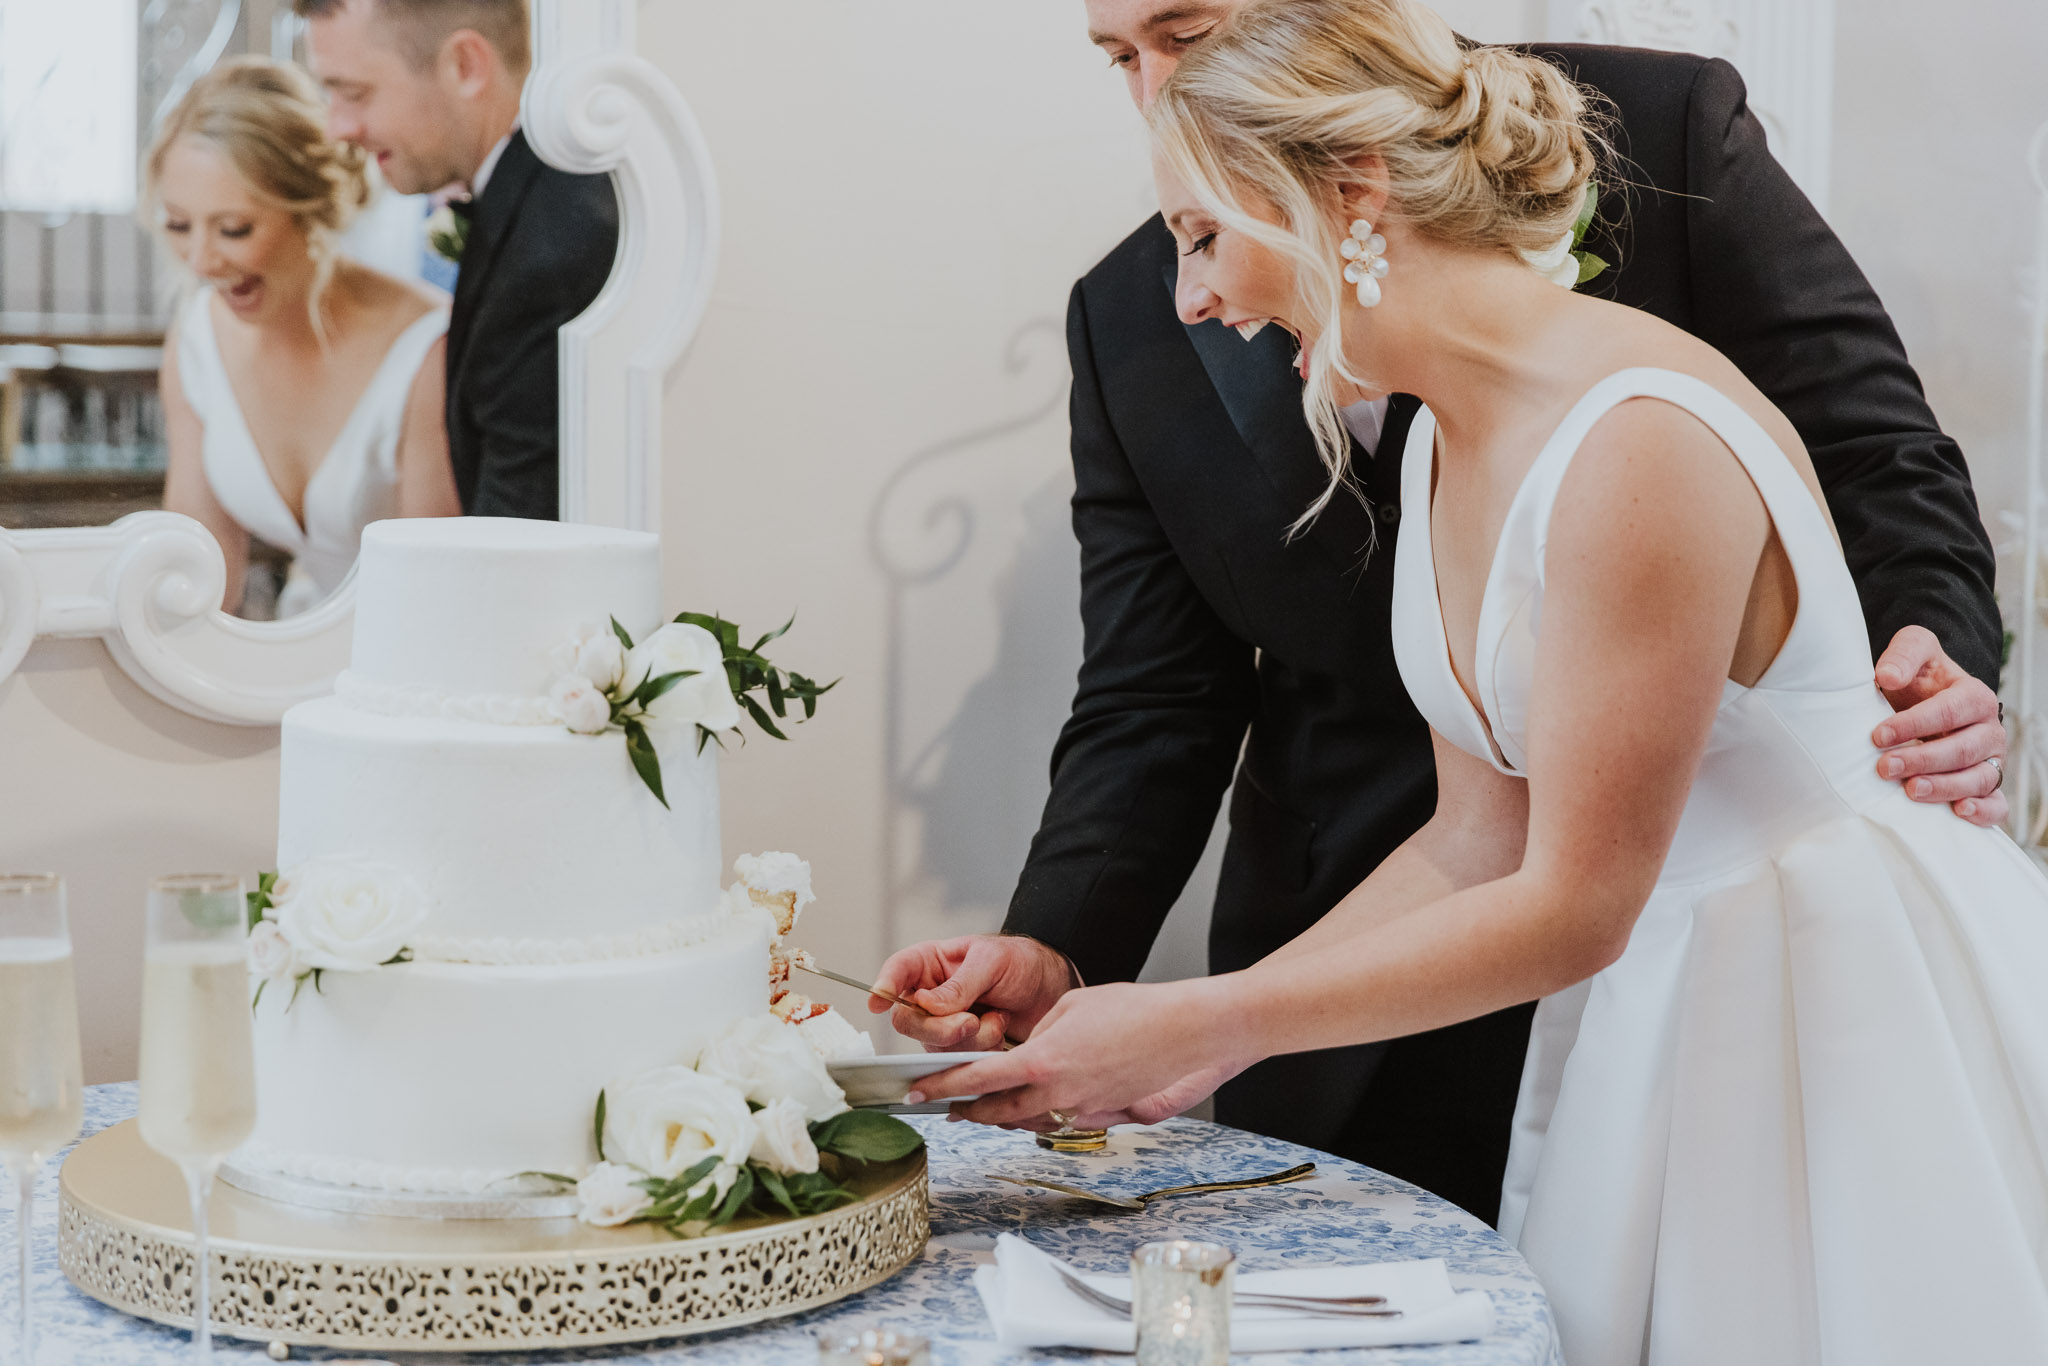 bride and groom cutting their cake at the white room loft wedding reception